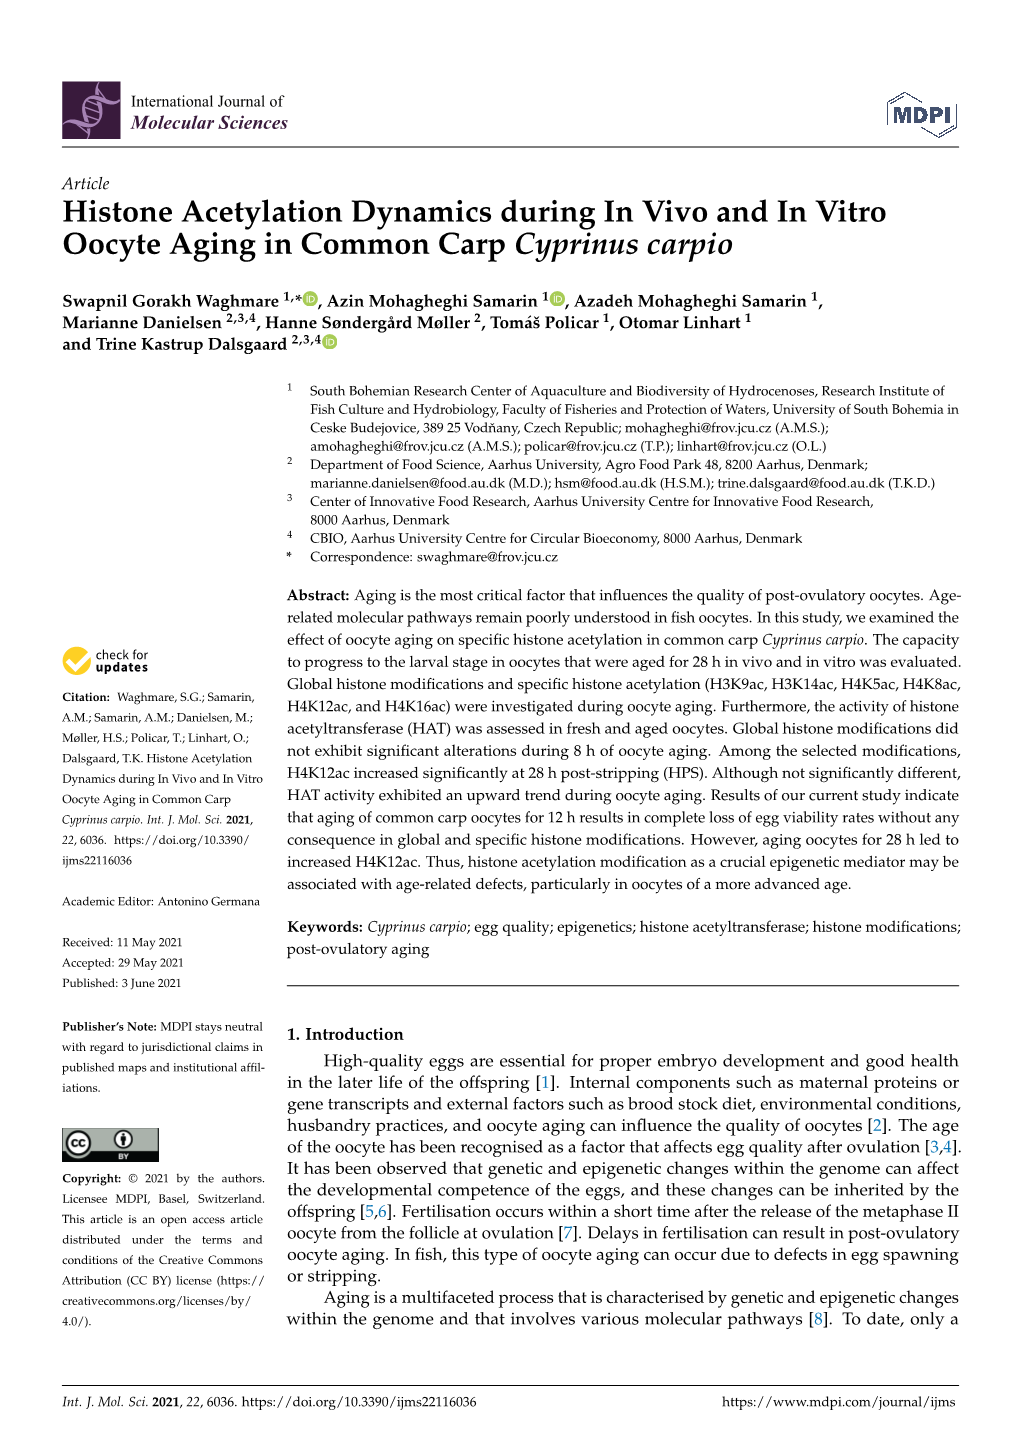 Histone Acetylation Dynamics During in Vivo and in Vitro Oocyte Aging in Common Carp Cyprinus Carpio